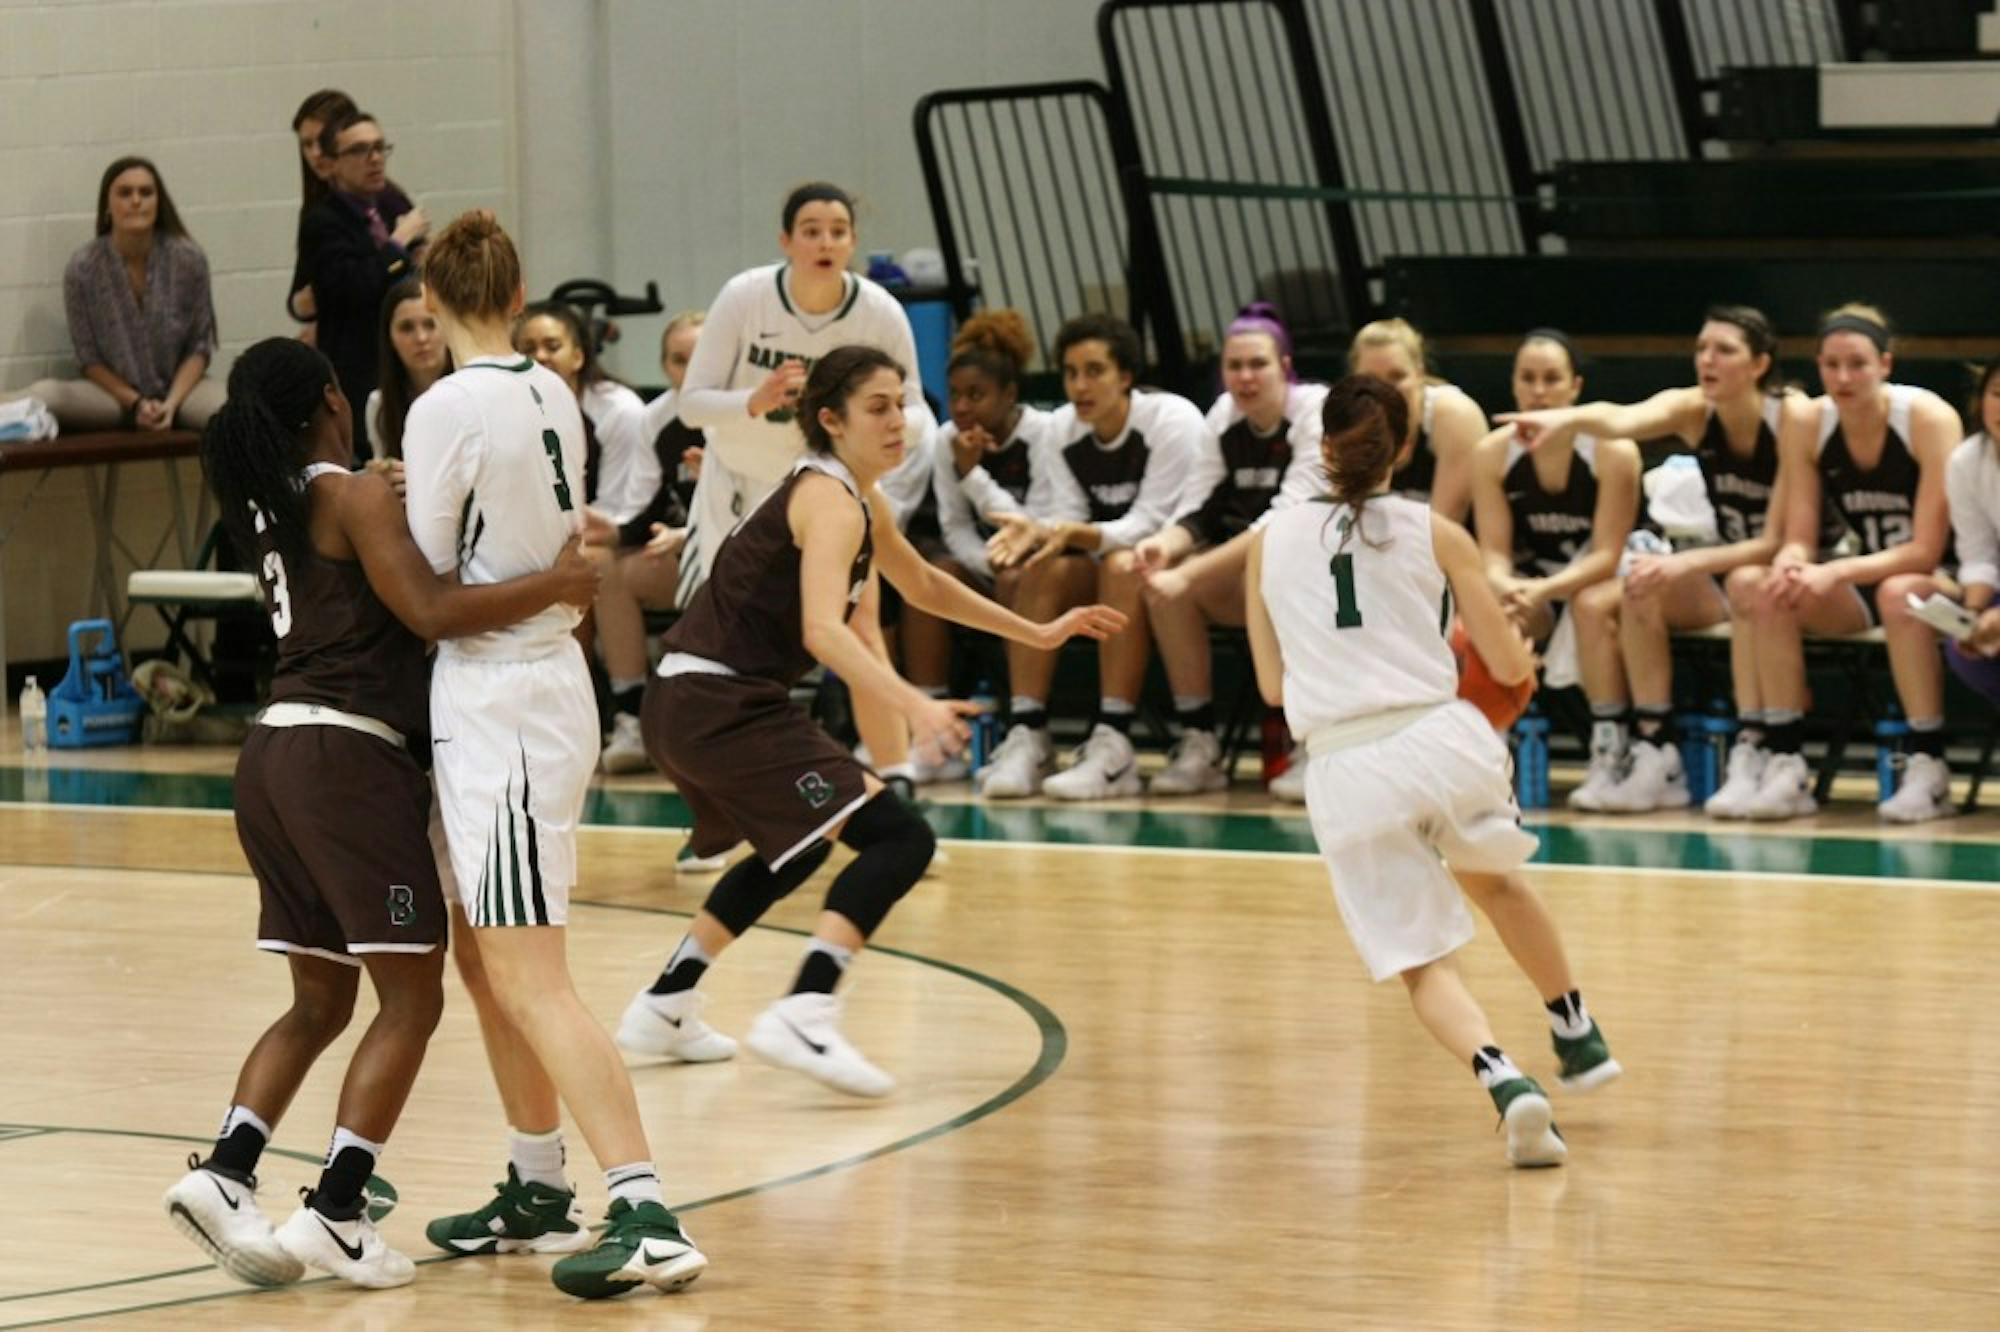 Point guard Cy Lippold ’19 (right) has emerged as a leader for the women’s basketball team, averaging 12.8 points per game.